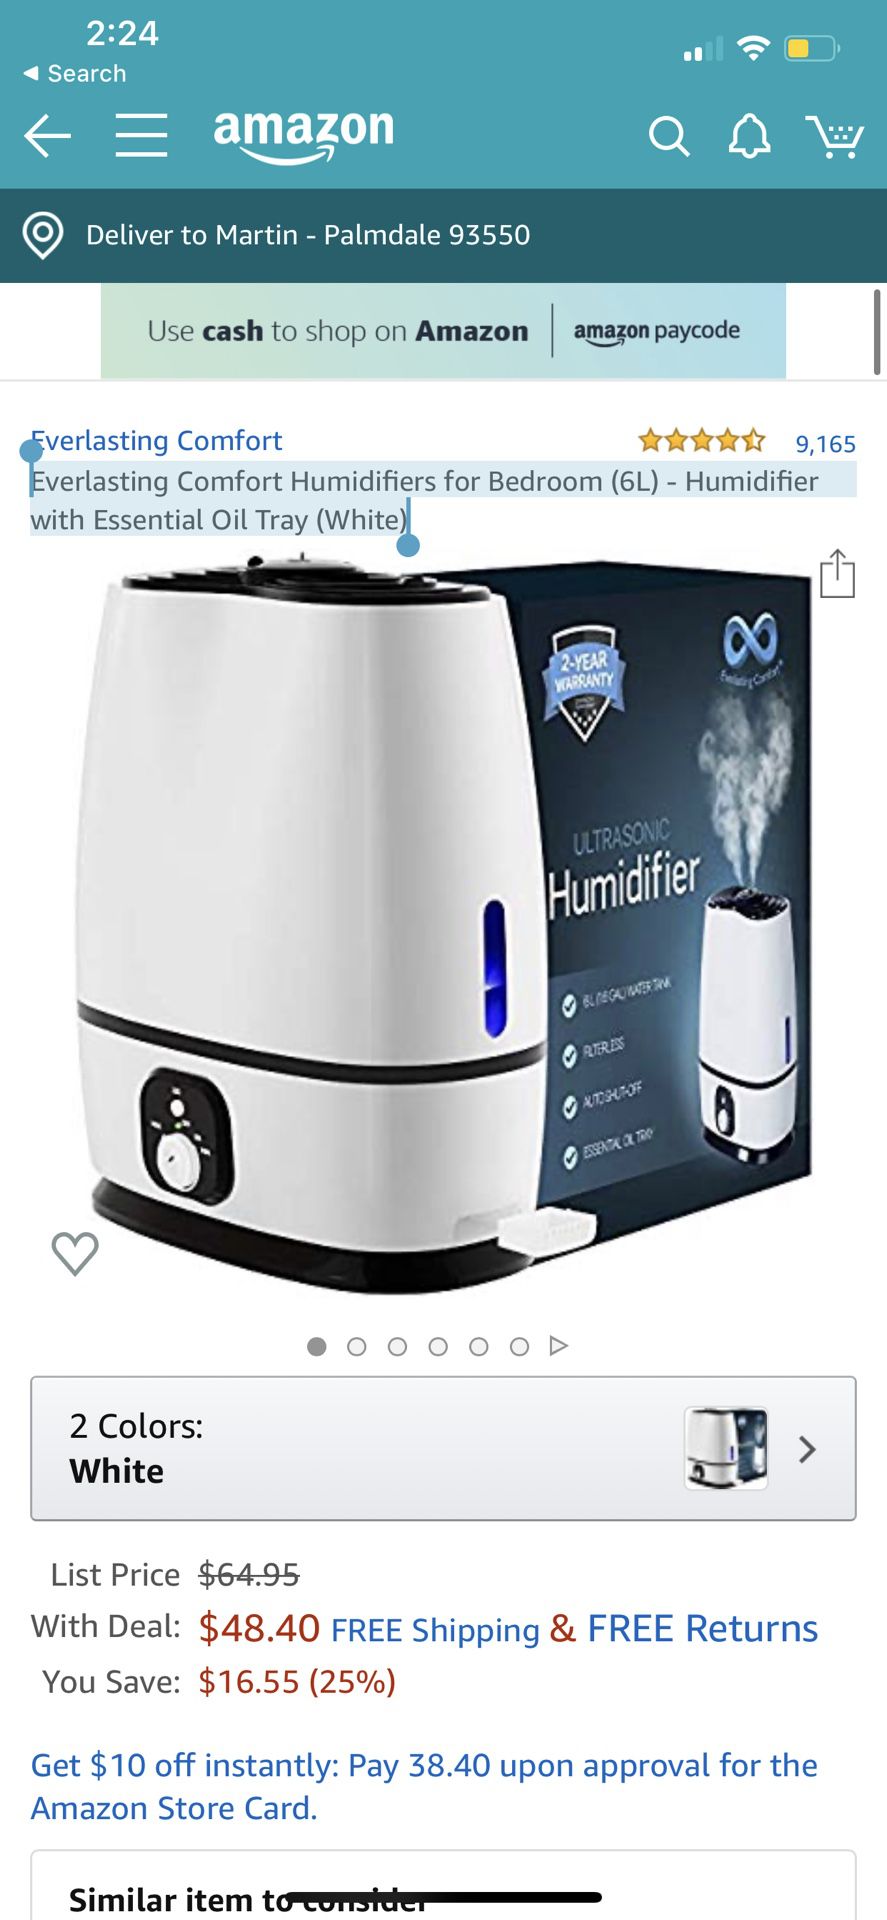 Everlasting Comfort Humidifiers for Bedroom (6L) - Humidifier with Essential Oil Tray (White)